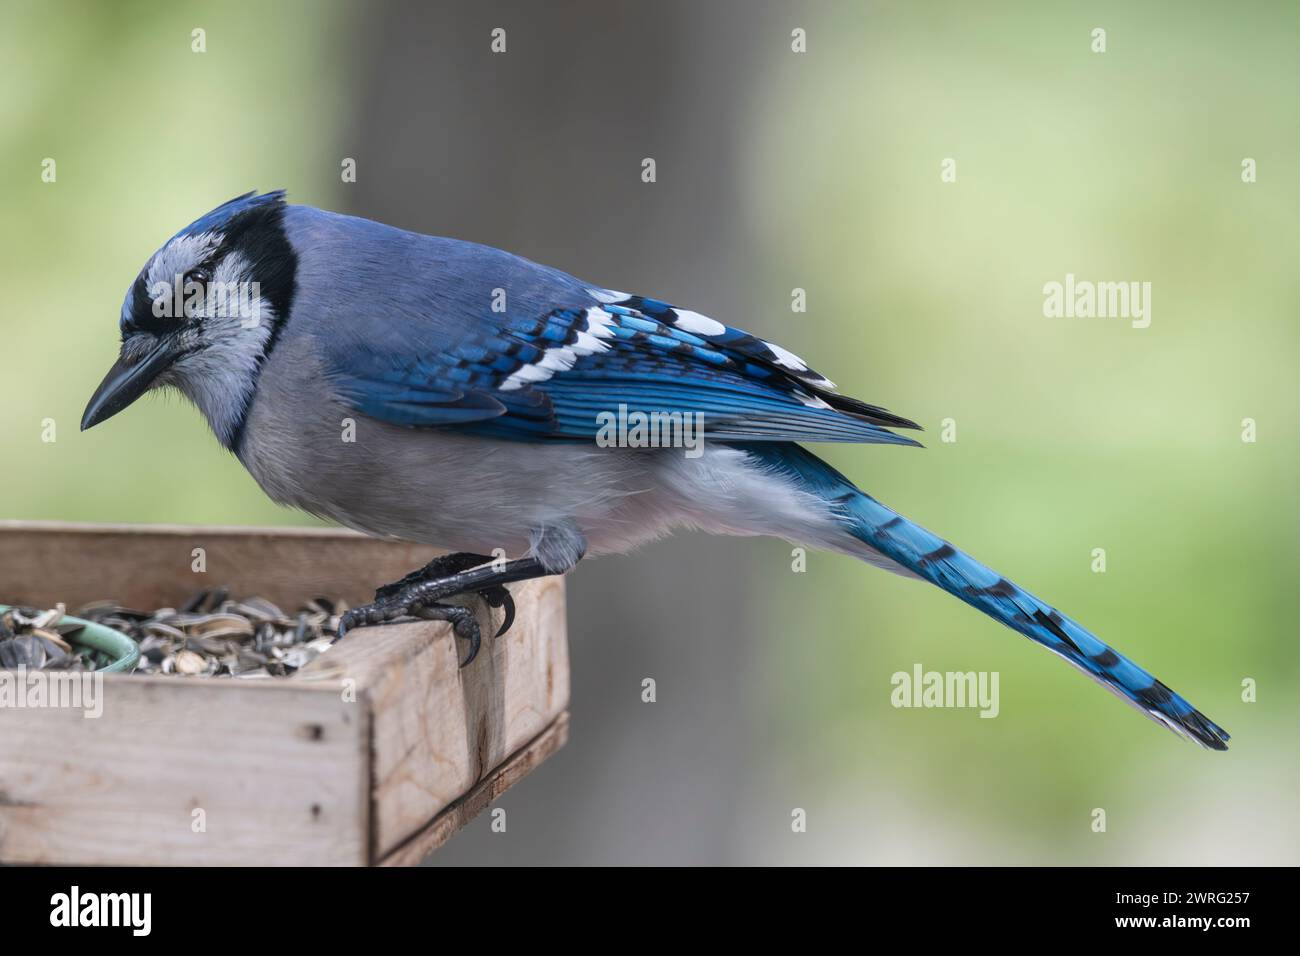 Blue jay perched at a bird feeder, Brownsburg-Chatham, Quebec, Canada Stock Photo